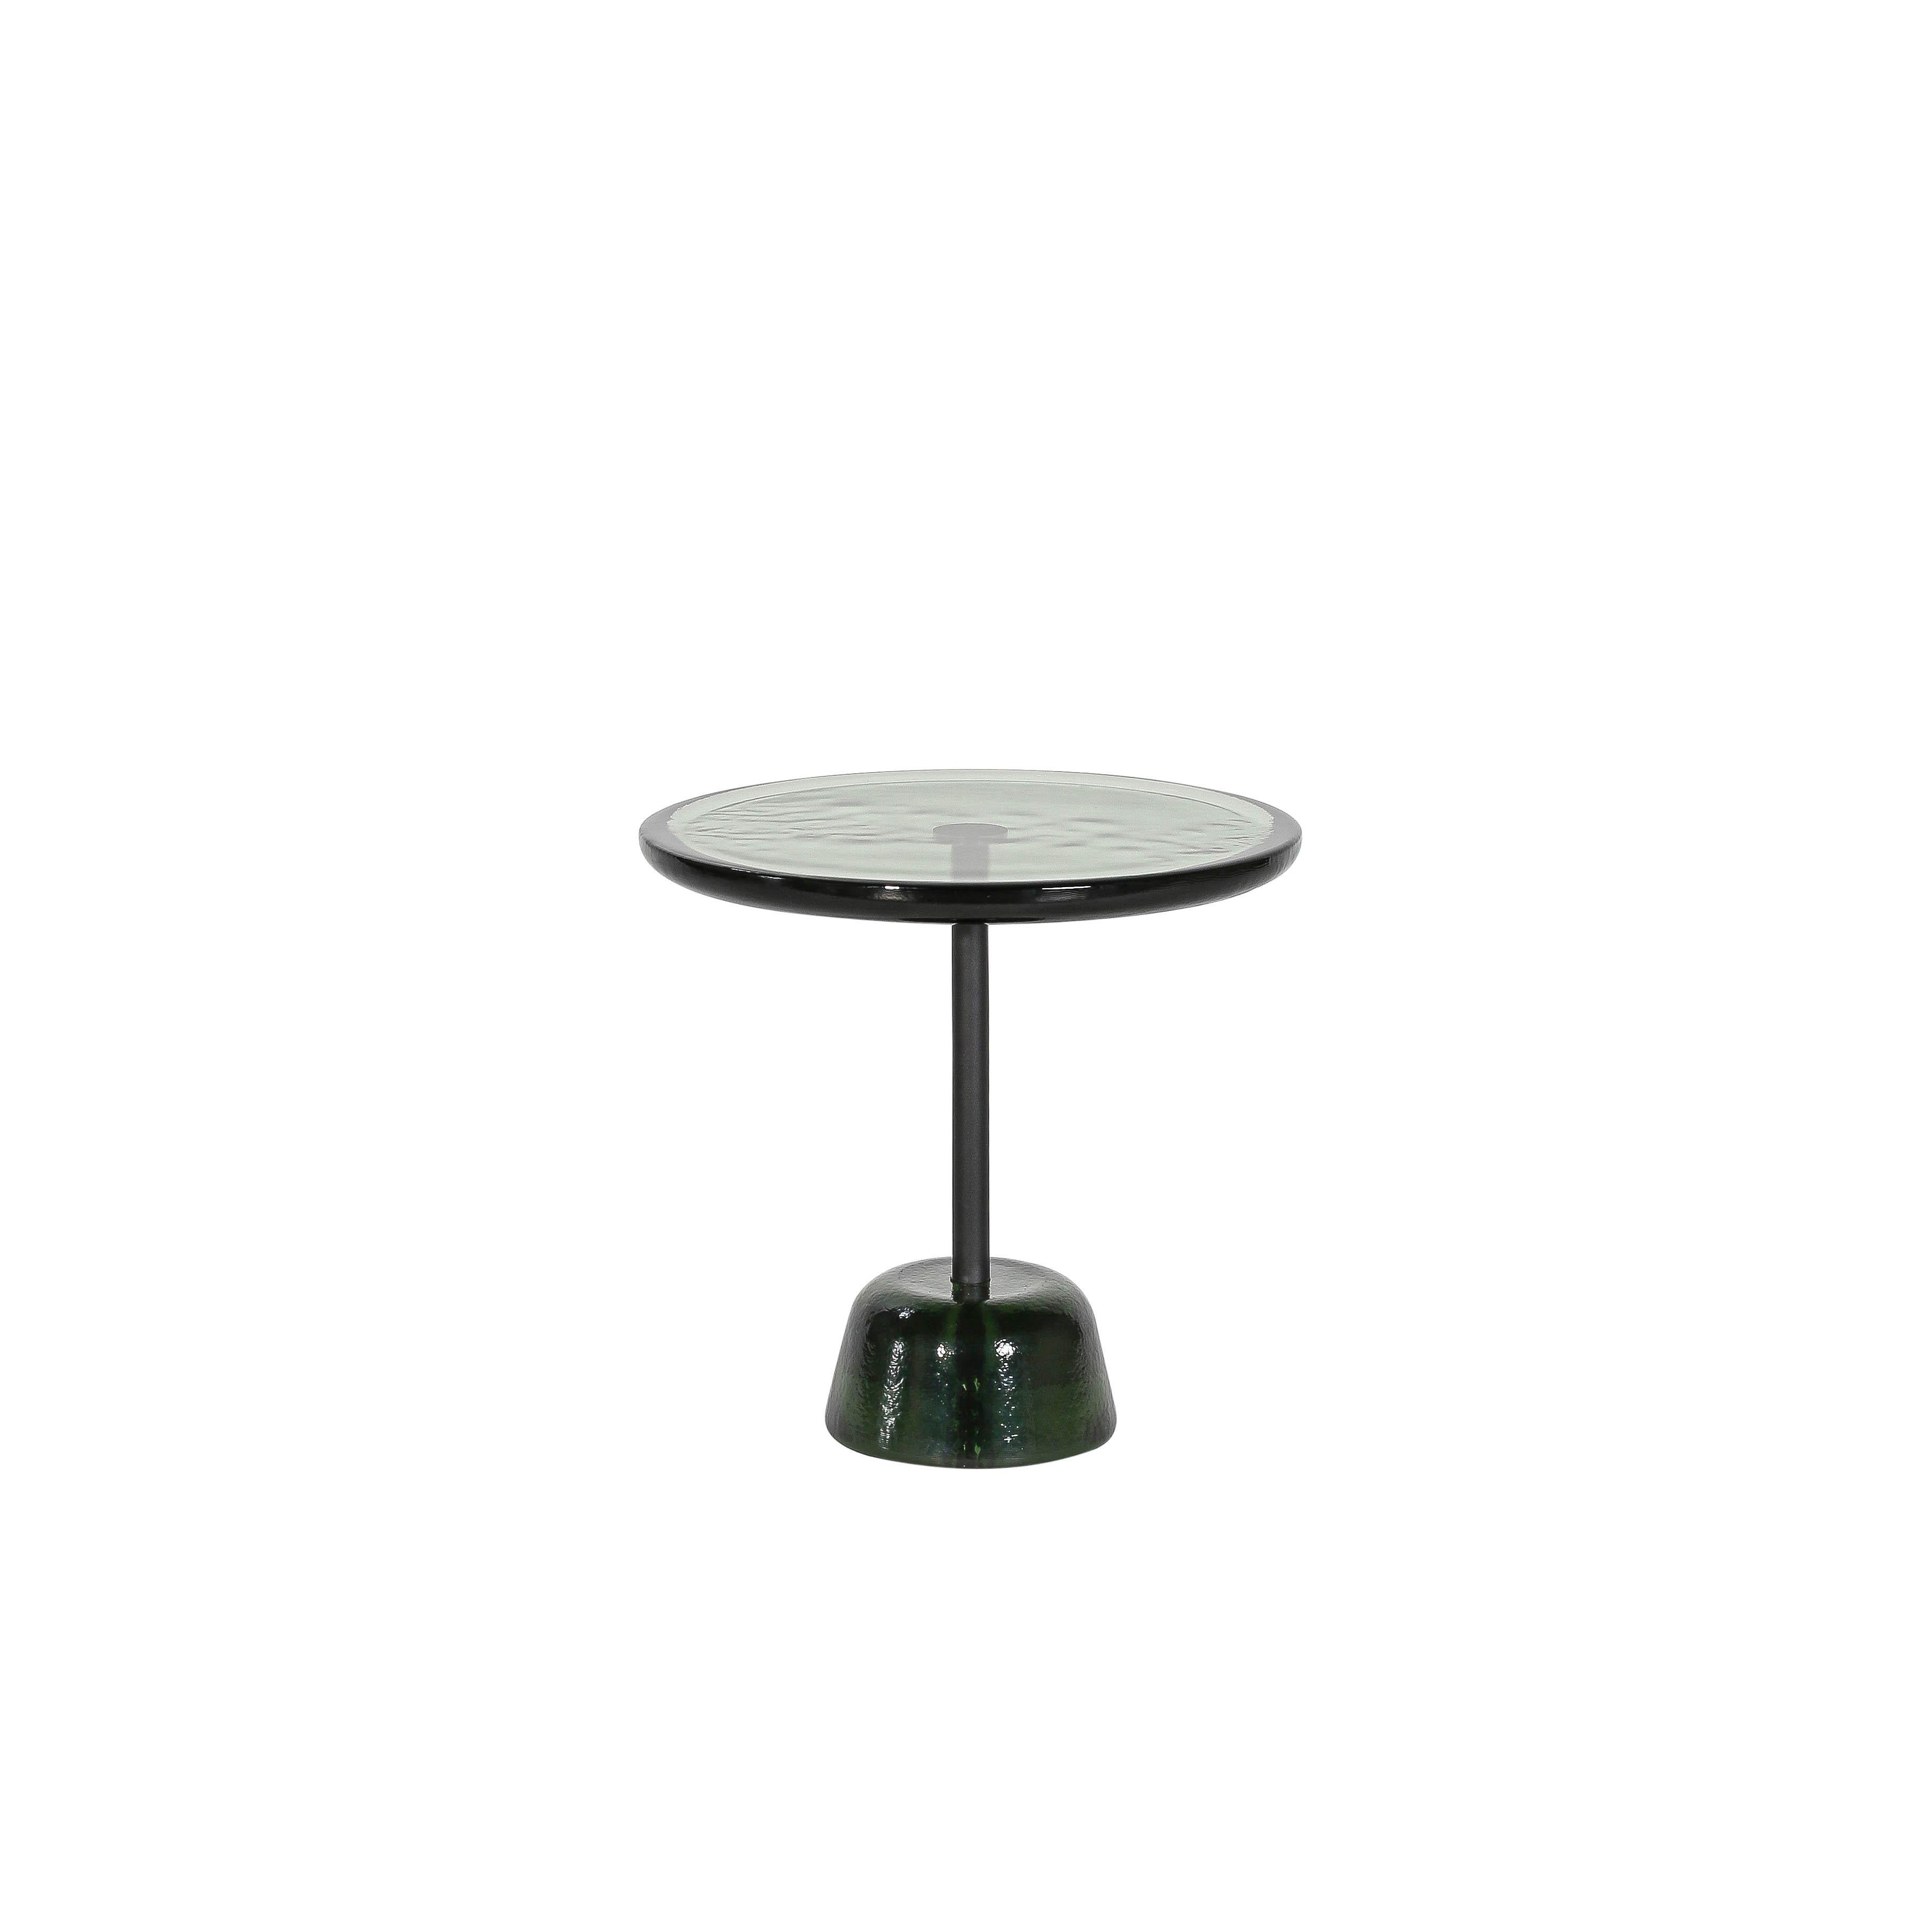 Pina low green black side table by Pulpo
Dimensions: D 44 x H 42 cm
Materials: glass; brass and steel

Also available in different colors.

Sebastian Herkner’s distinctively tall, skinny side table series pina is inspired by the abstract turns